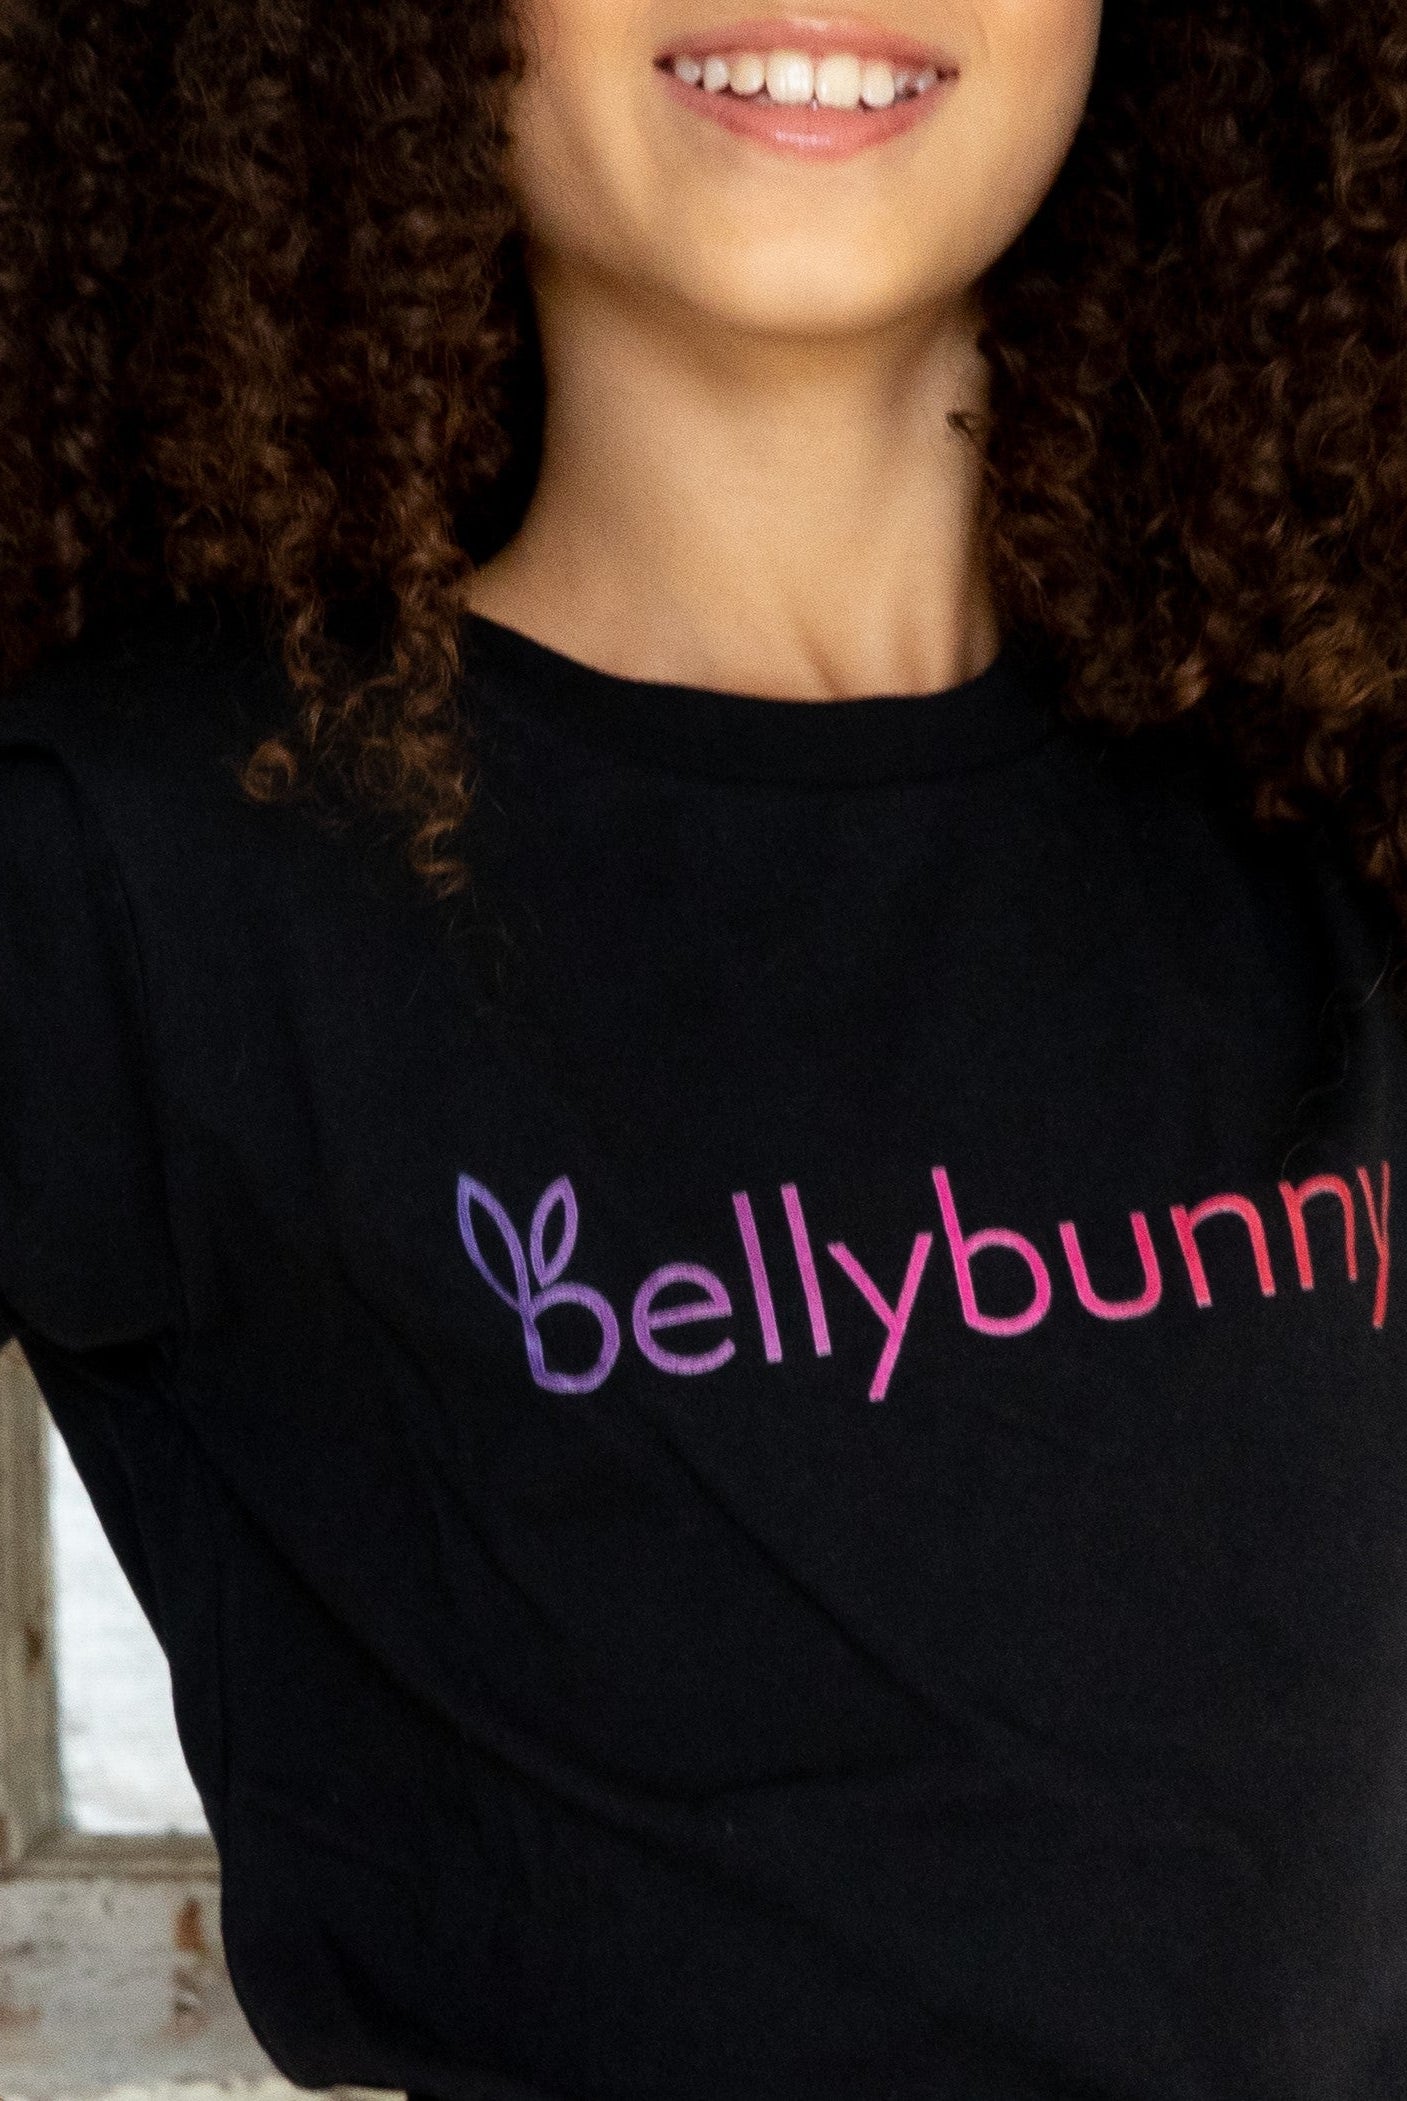 Bellybunny Youth Long Sleeve T-Shirt